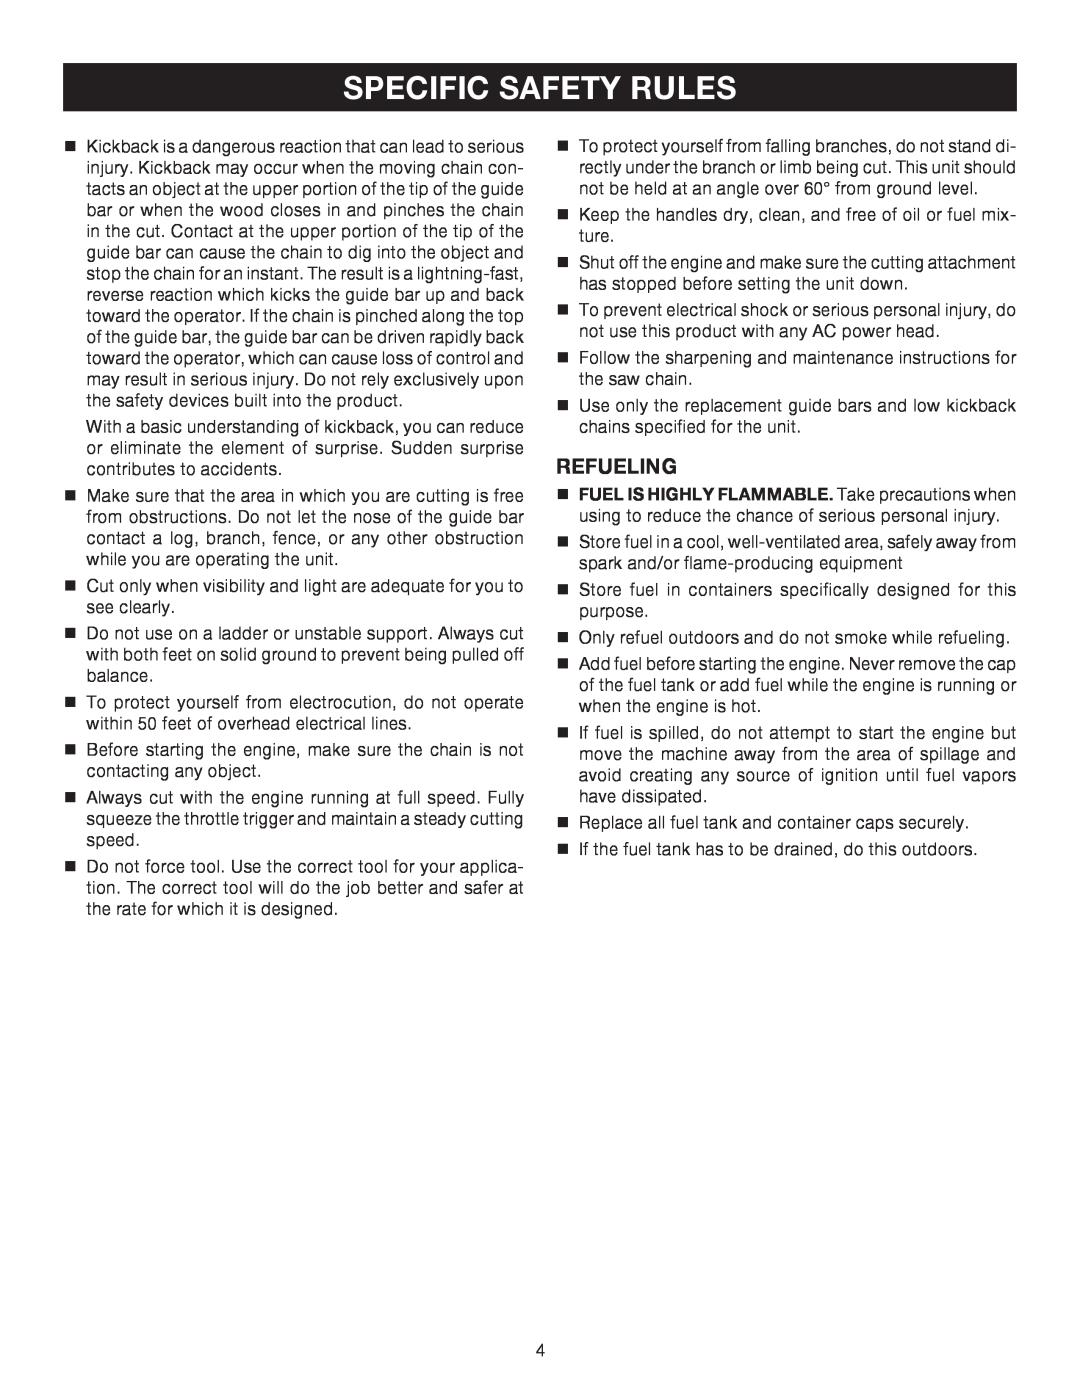 Ryobi RY52014 manual Specific Safety Rules, Refueling 